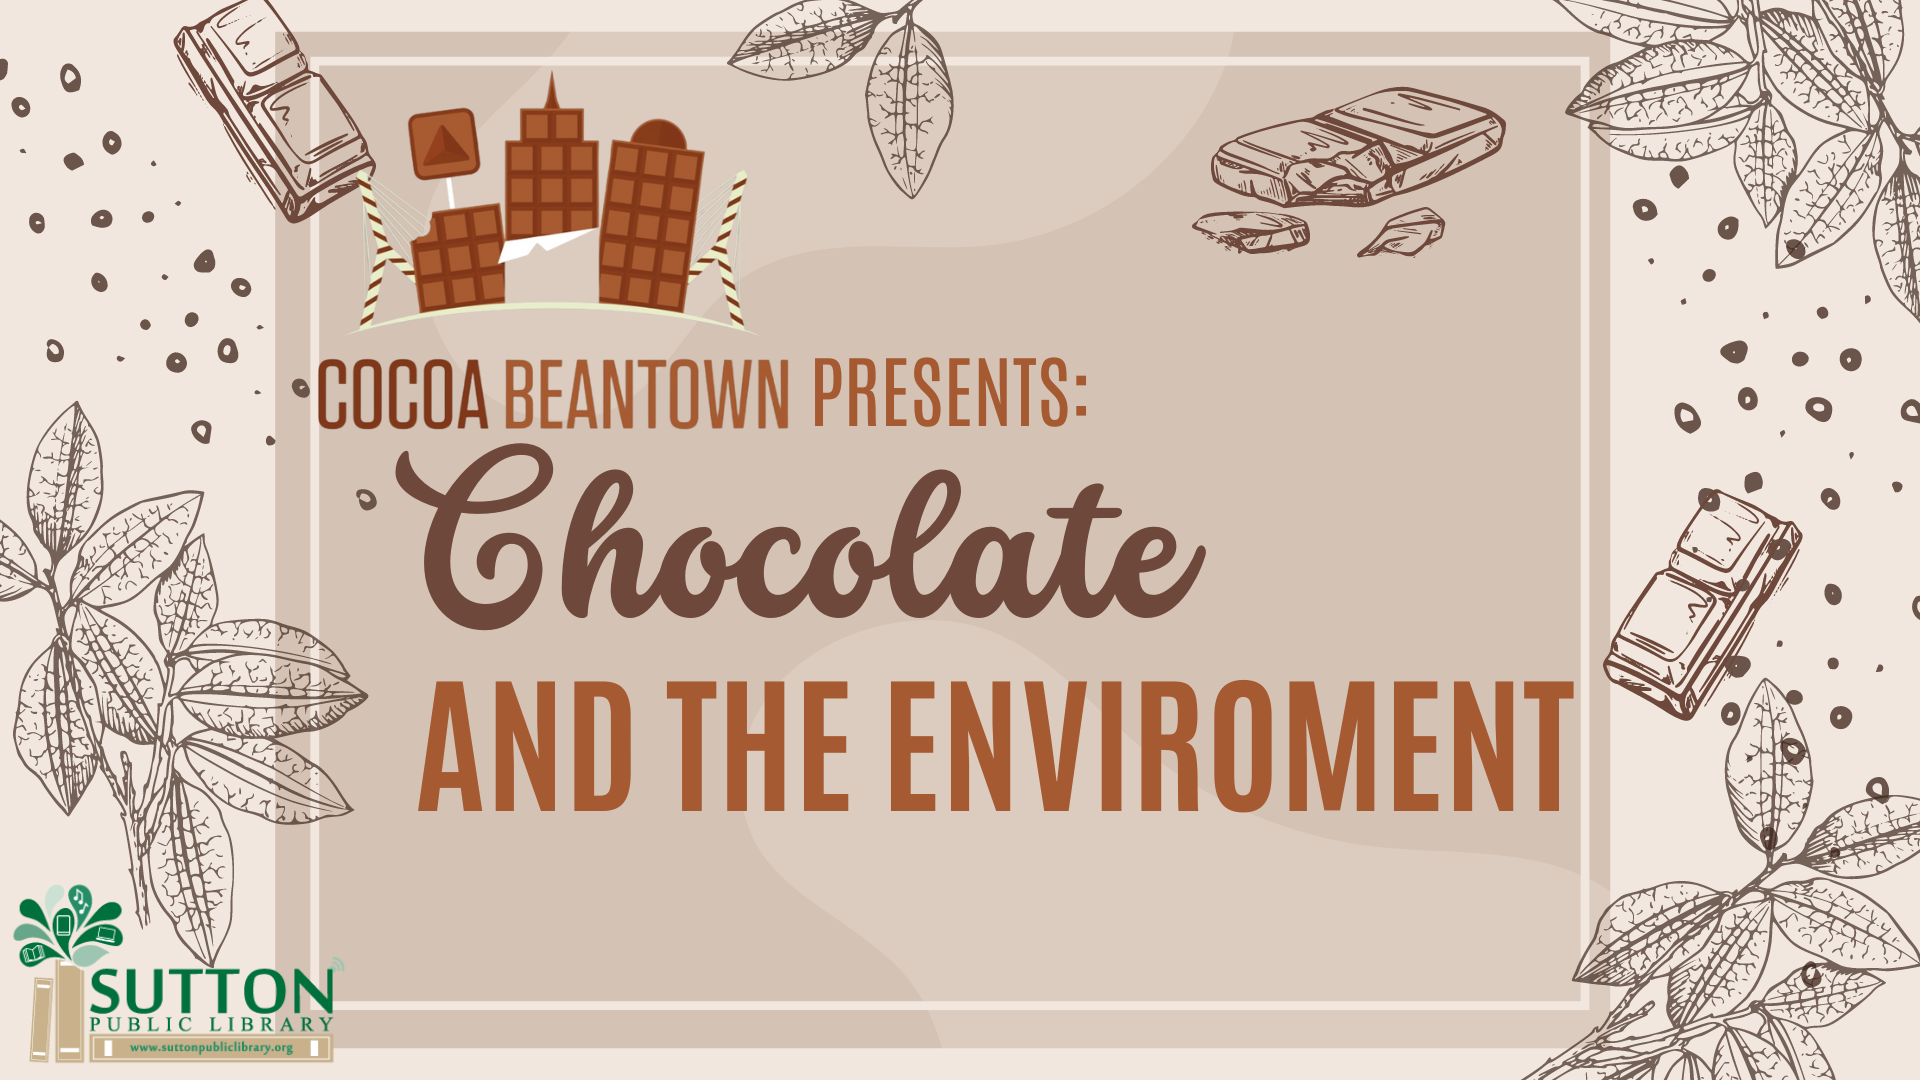 Cocoa Bean Town resents: Chocolate and the Environment!